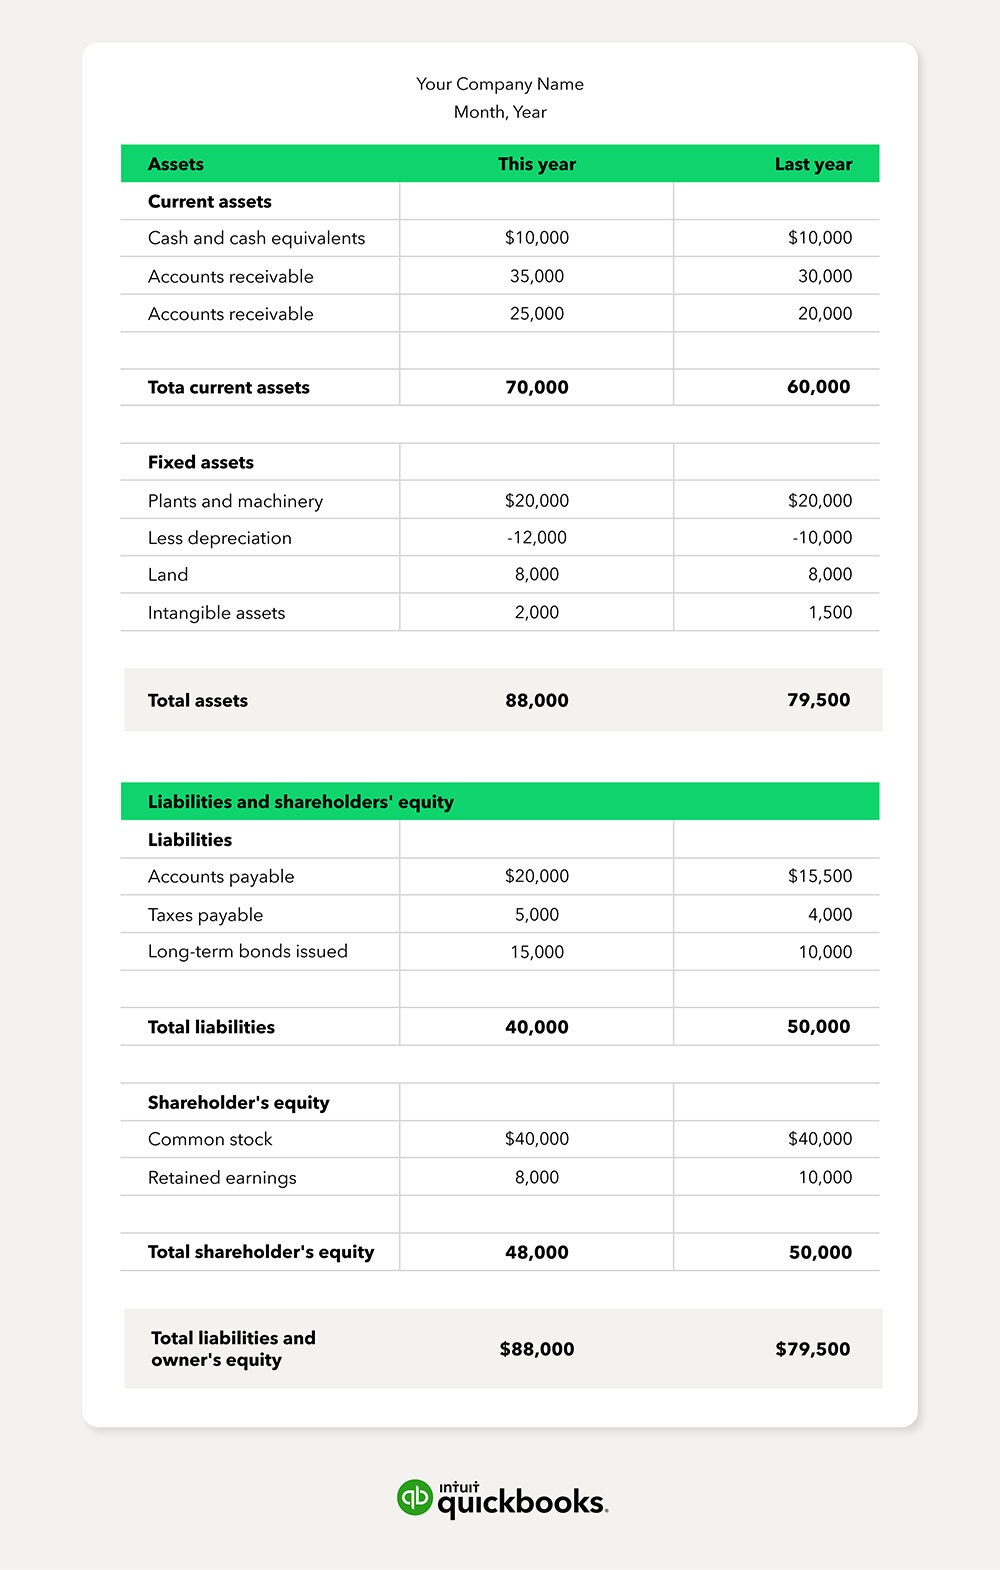 balance sheet example with static numbers to showcase assets, liabilities, and shareholder equity sections.